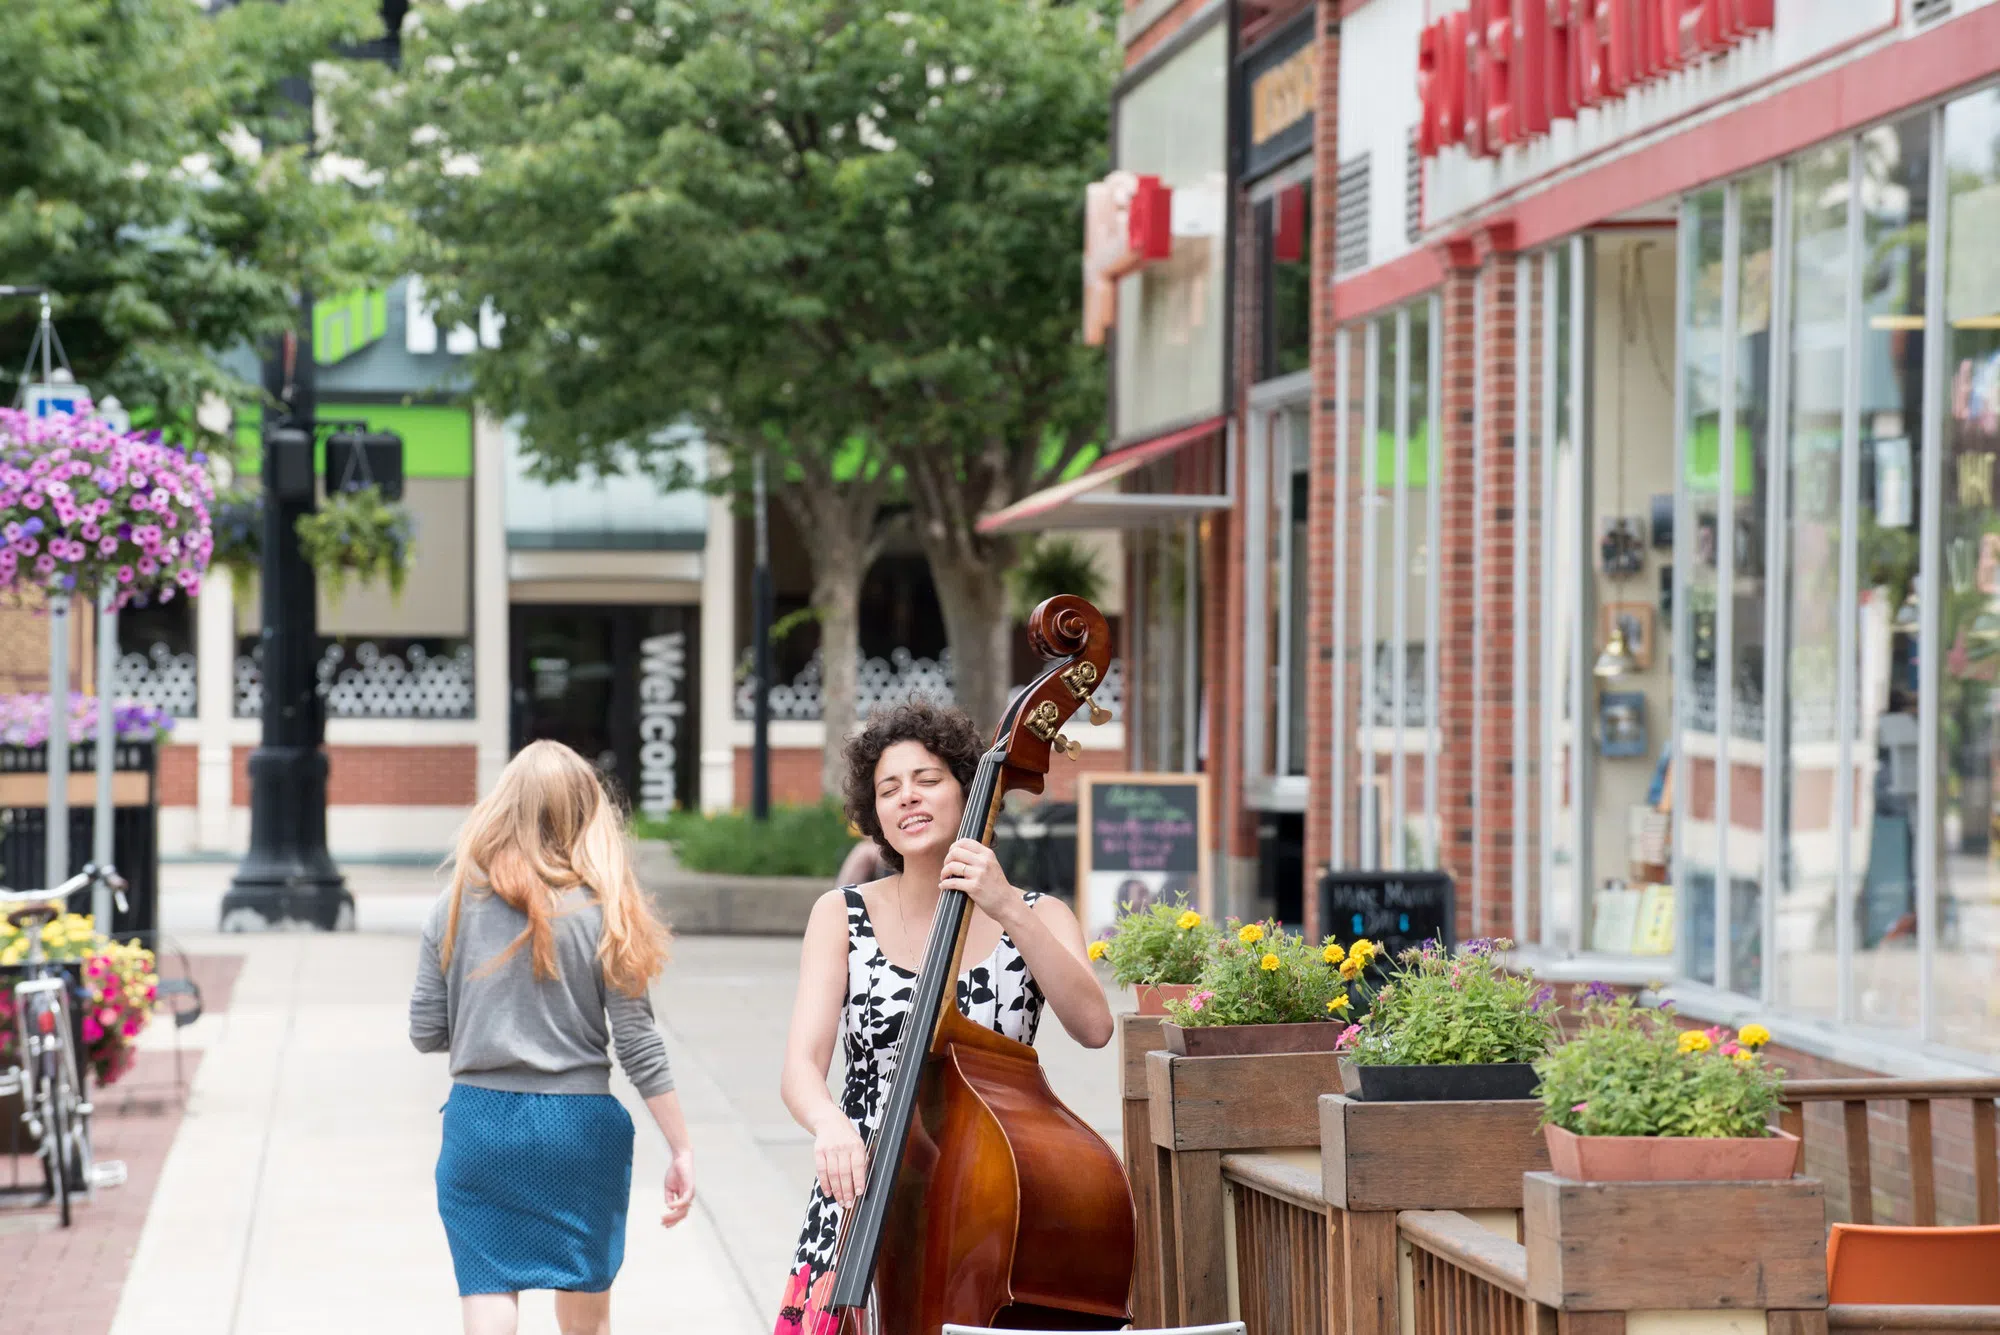 A student plays her upright bass in front of a business in downtown Oberlin.